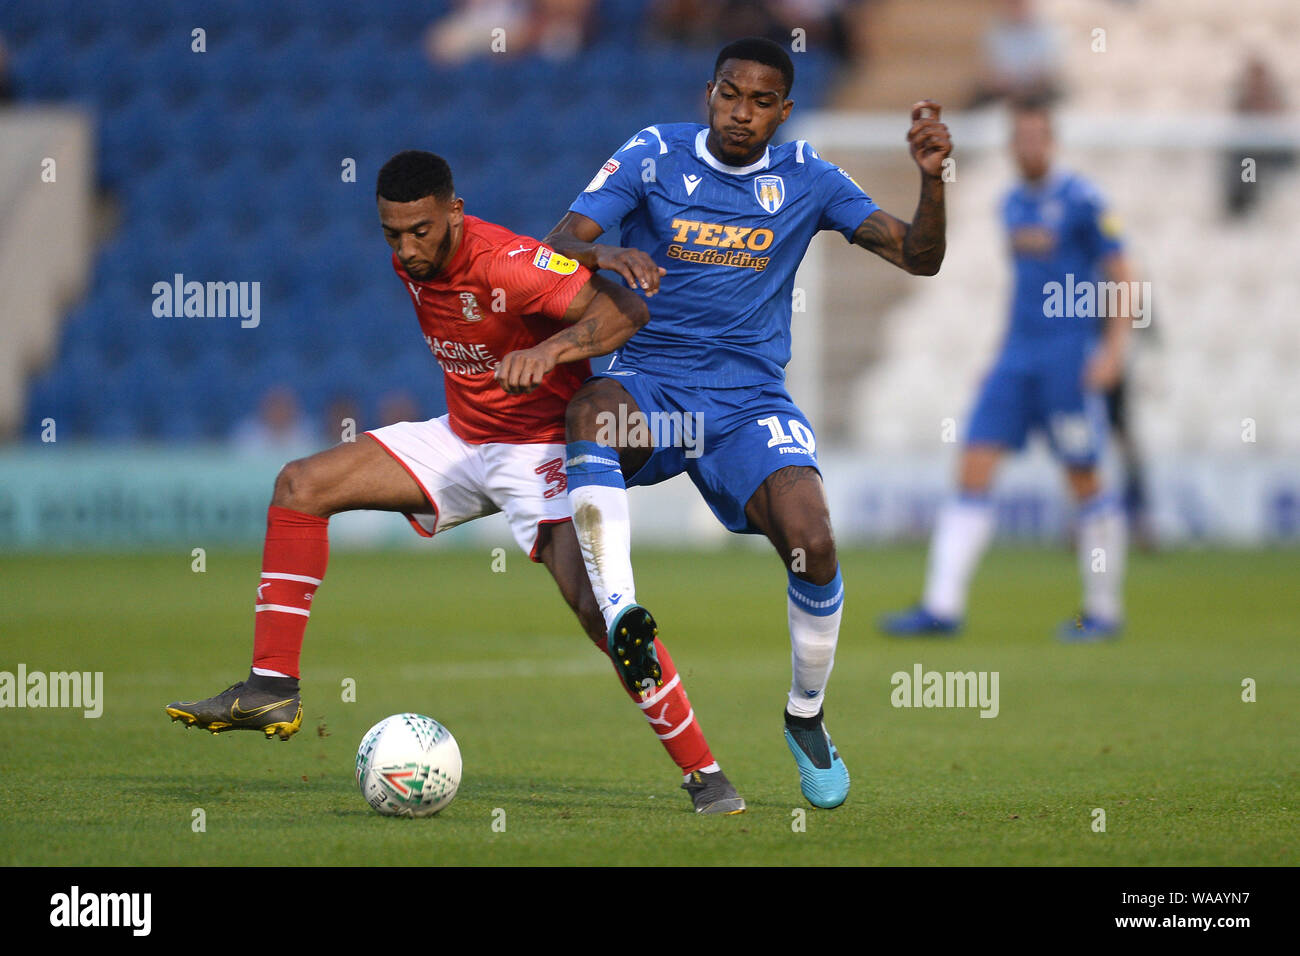 Jevani Brown of Colchester United does battle with Keshi Anderson of Swindon Town - Colchester United v Swindon Town, Carabao Cup, JobServe Community Stadium, Colchester, UK - 13th August 2019  Editorial Use Only - DataCo restrictions apply Stock Photo